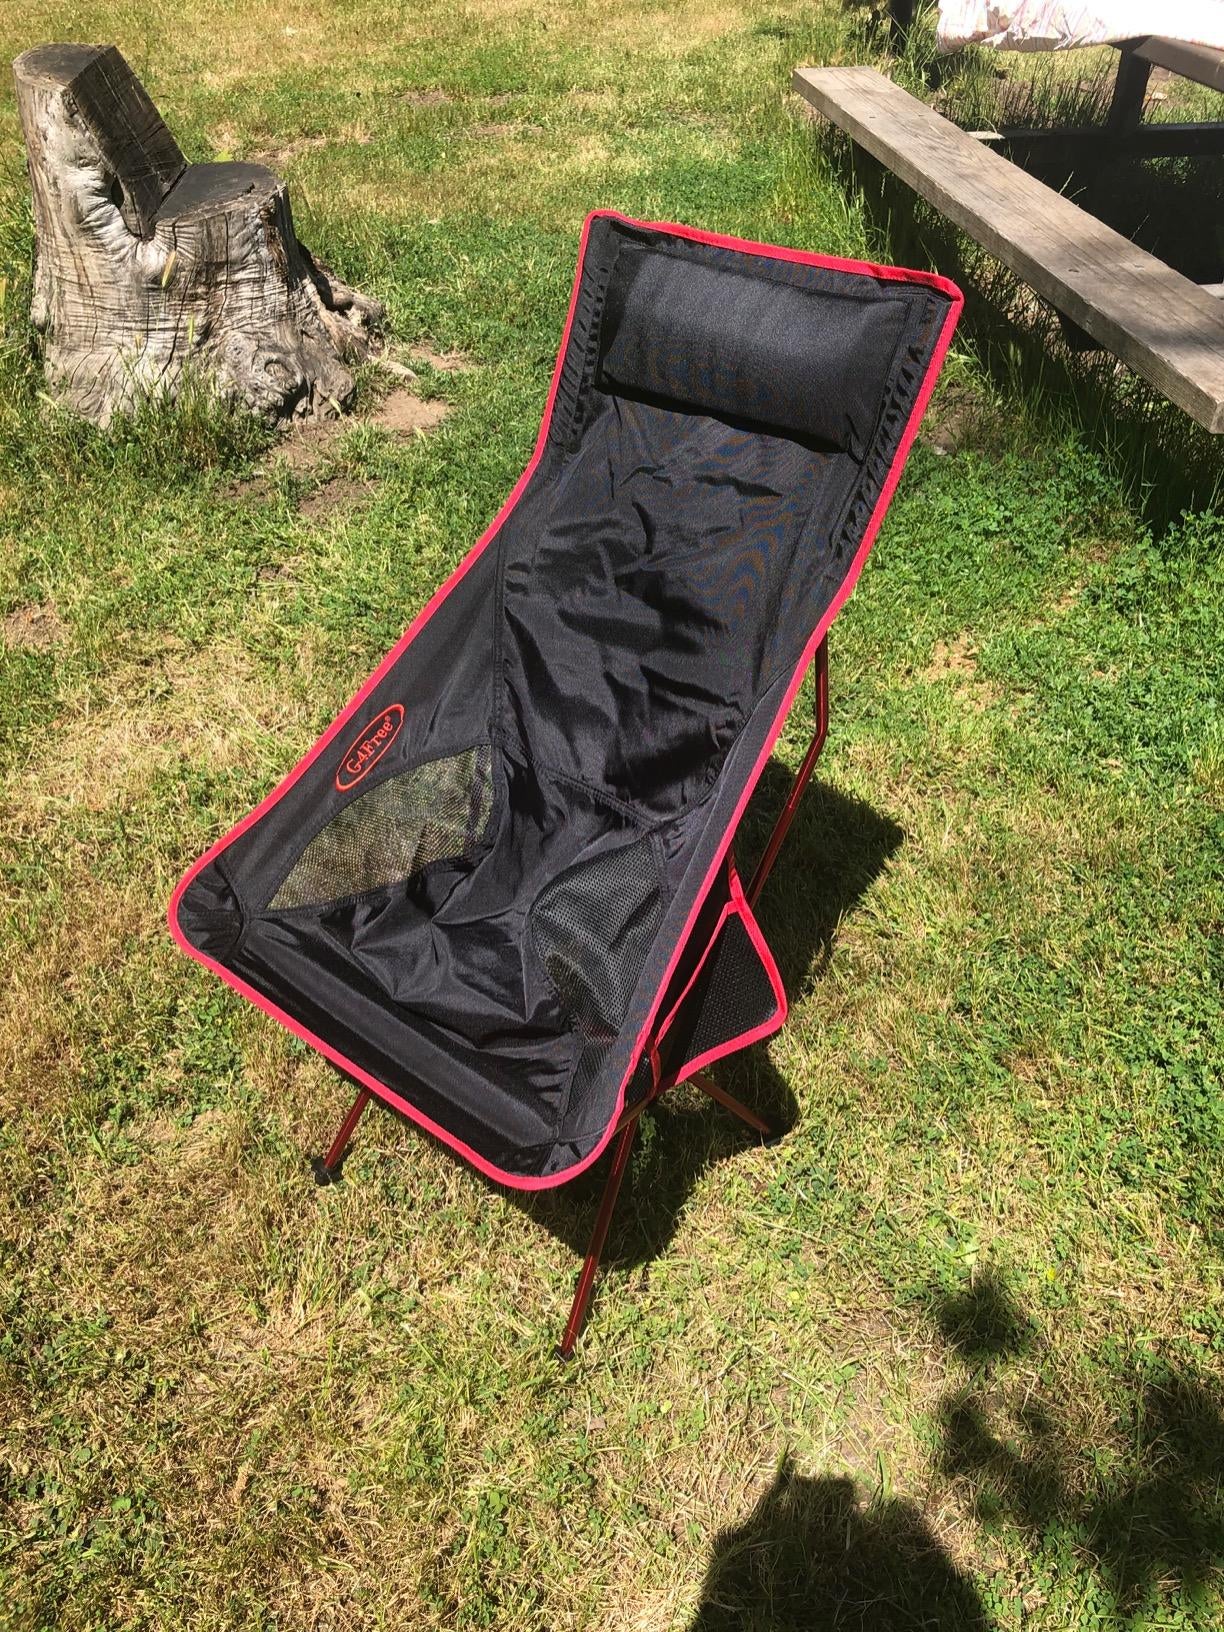 G4Free Lightweight Portable Folding Chair Review 